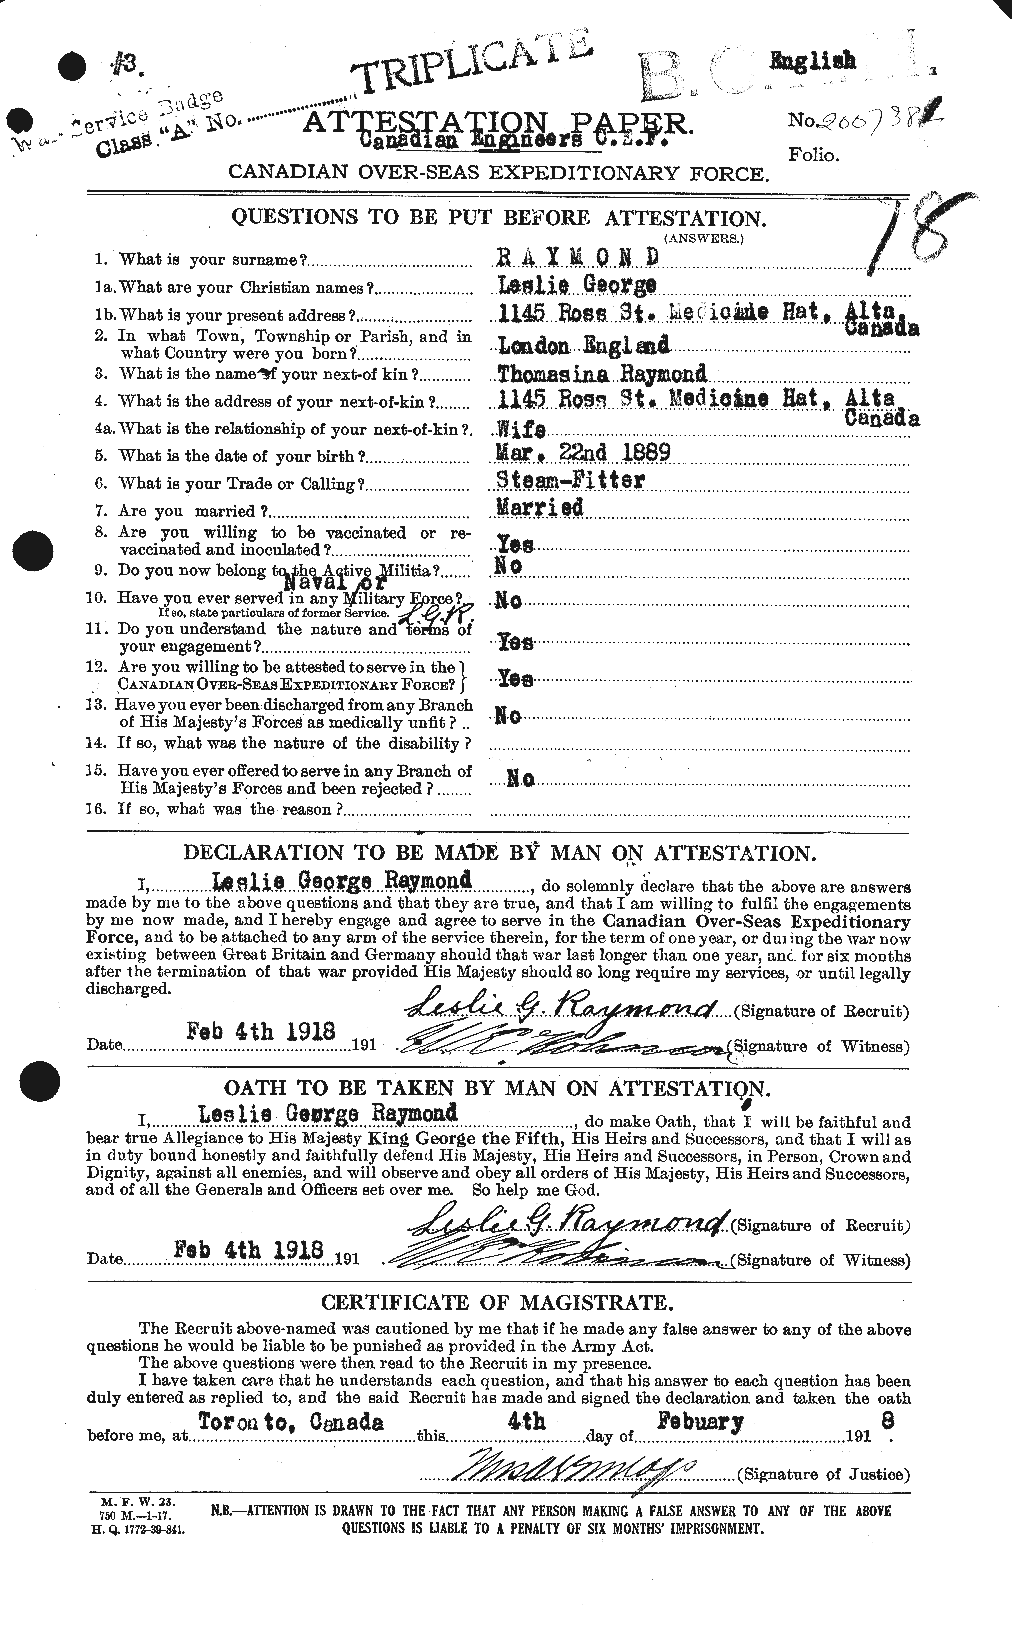 Personnel Records of the First World War - CEF 595412a